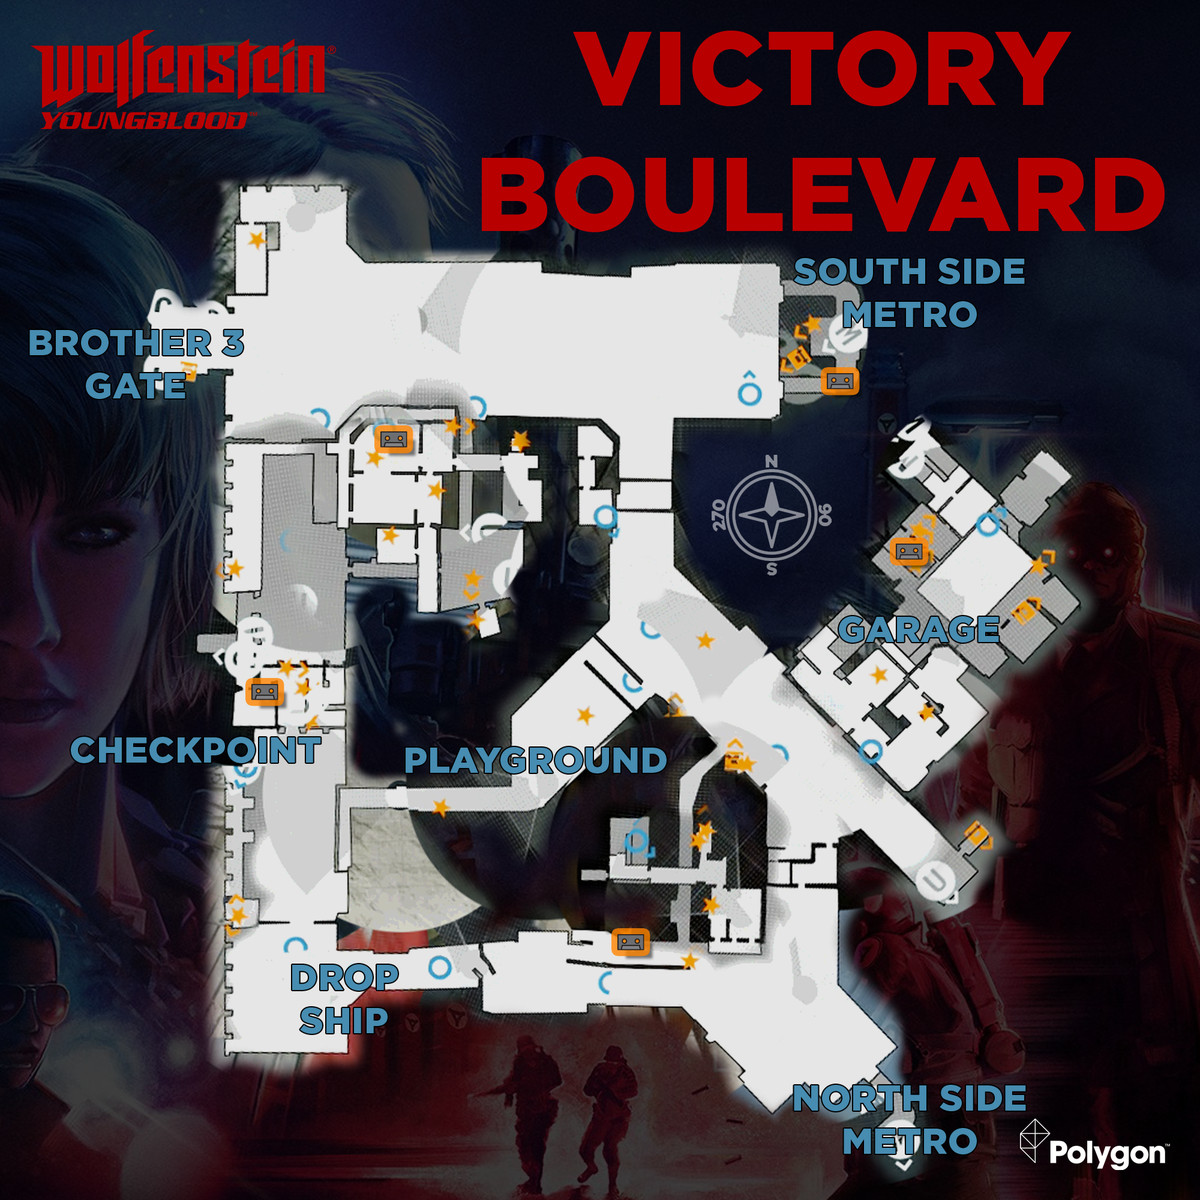 Wolfenstein: Youngblood Victory Boulevard map with Cassette Tape locations